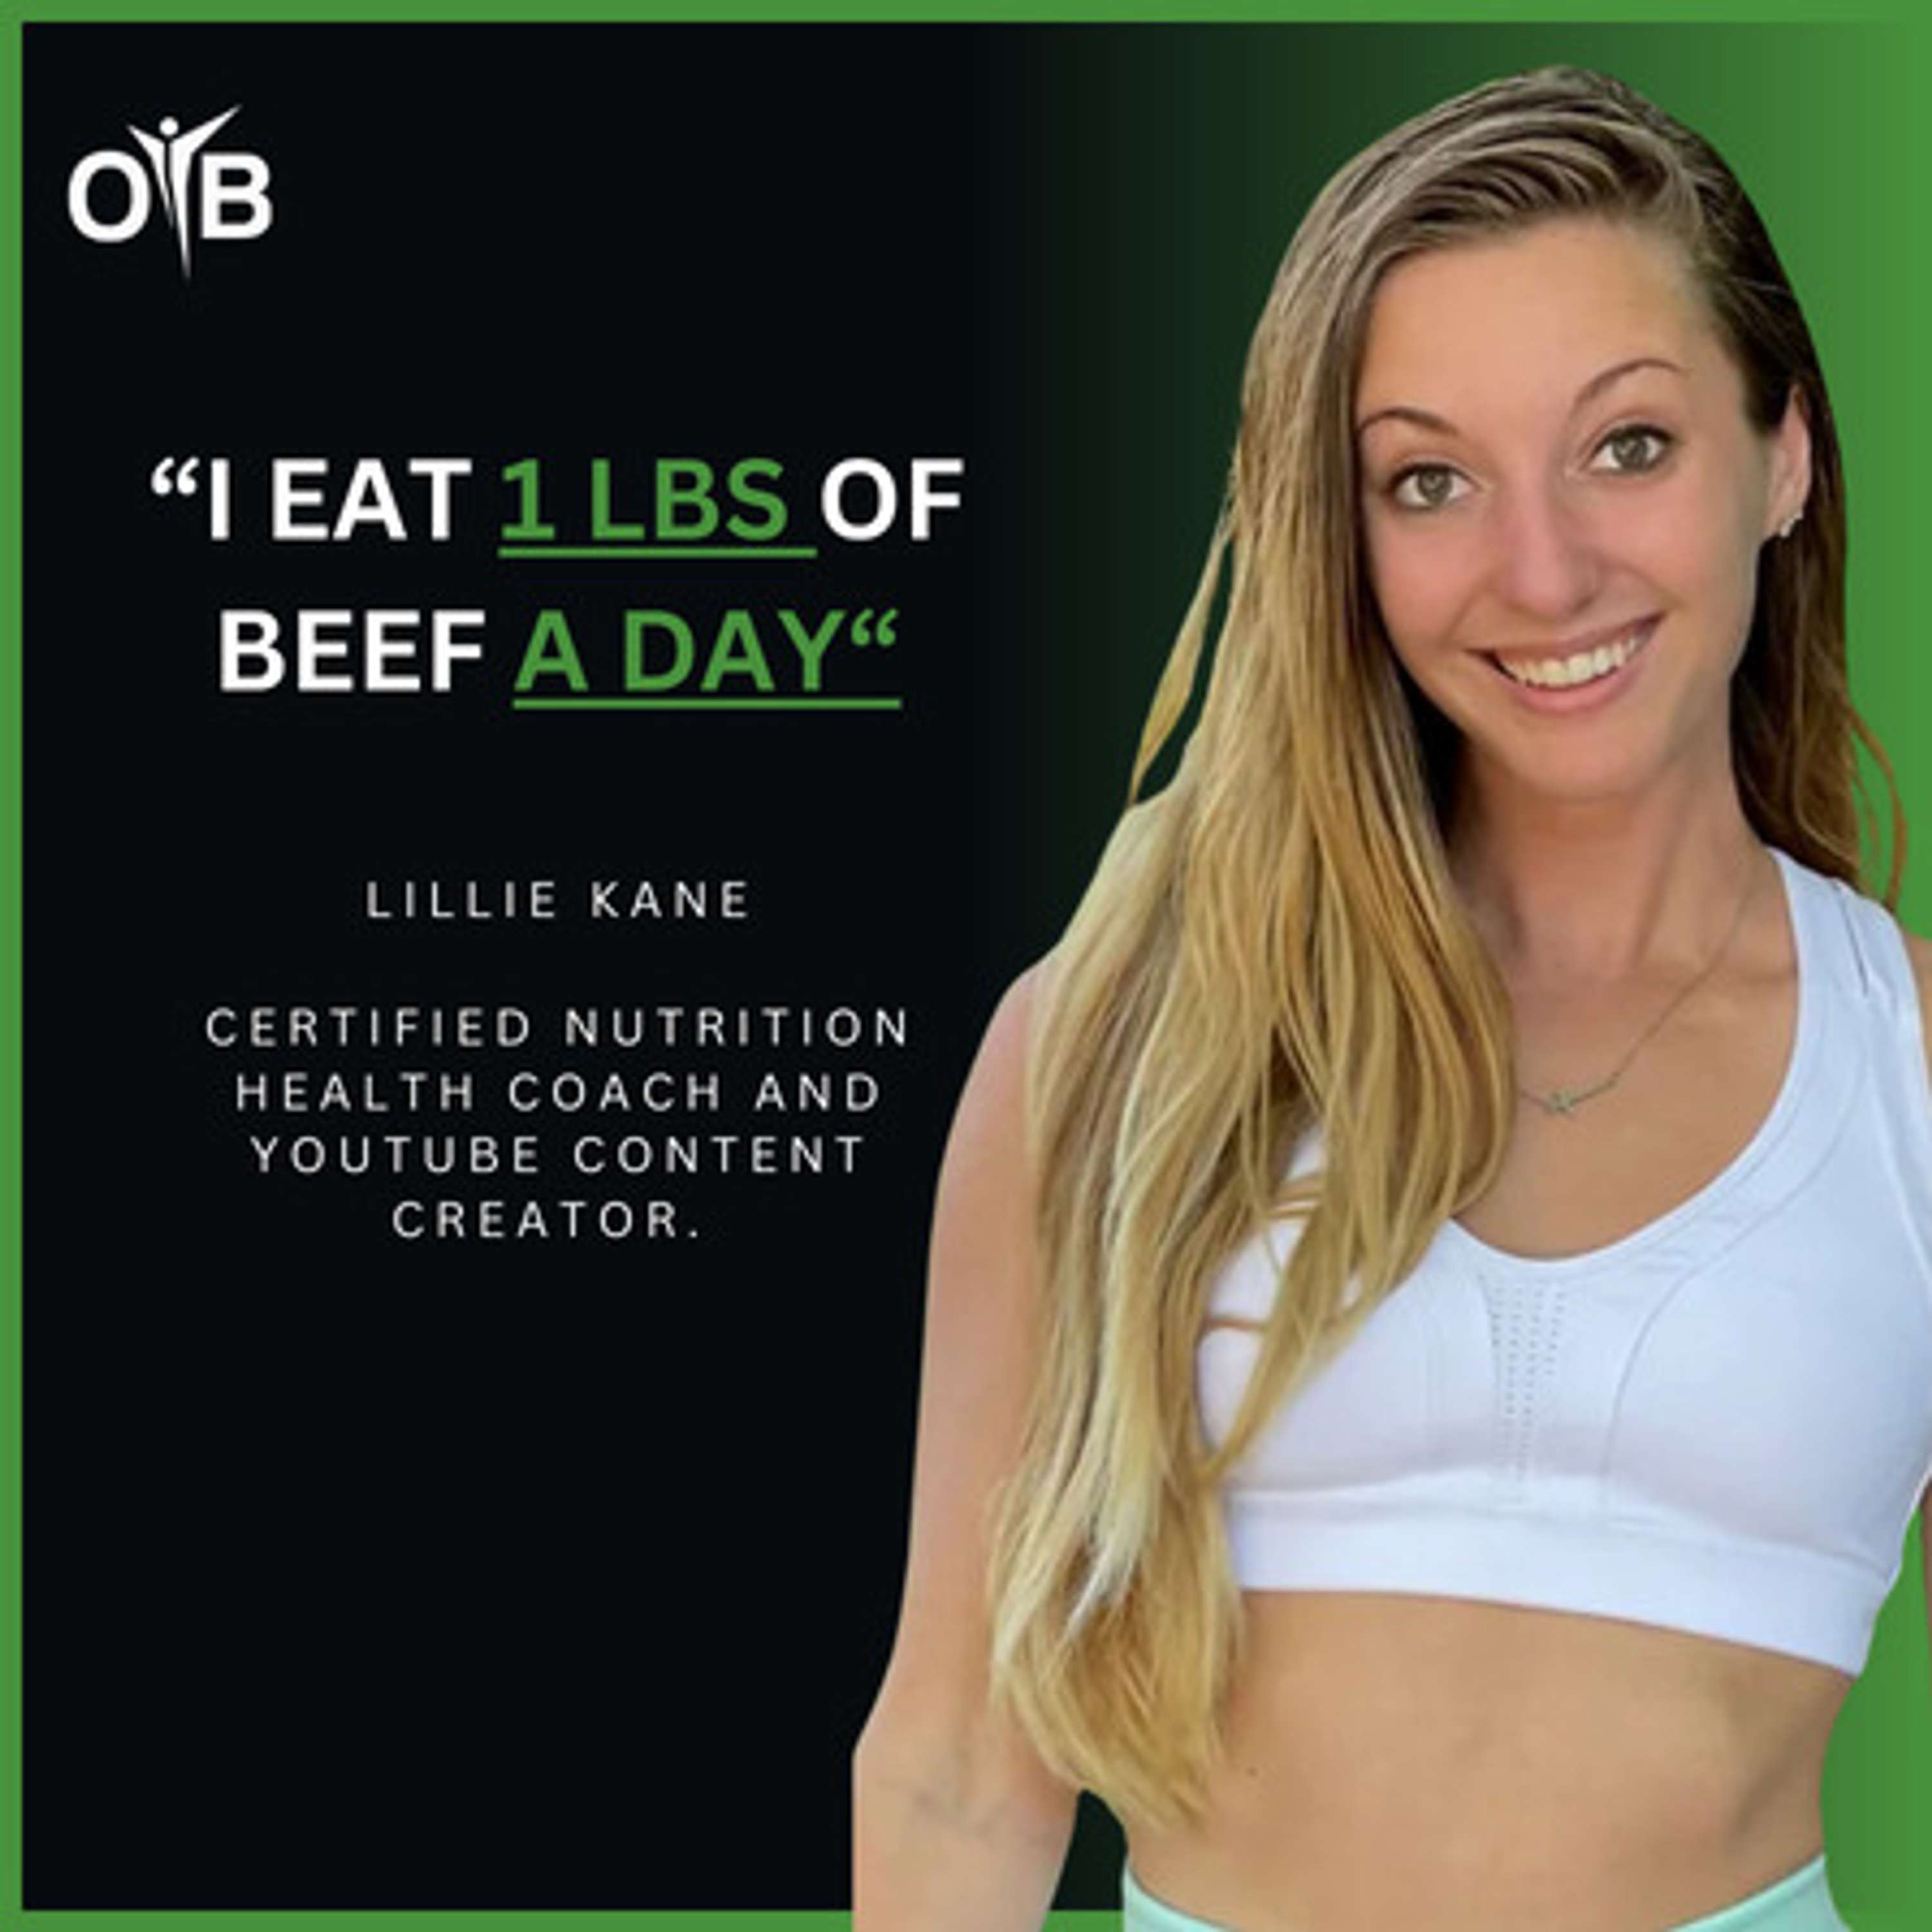 Balancing Nutrition, Training and Relationships in Personal Growth with Lillie Kane.